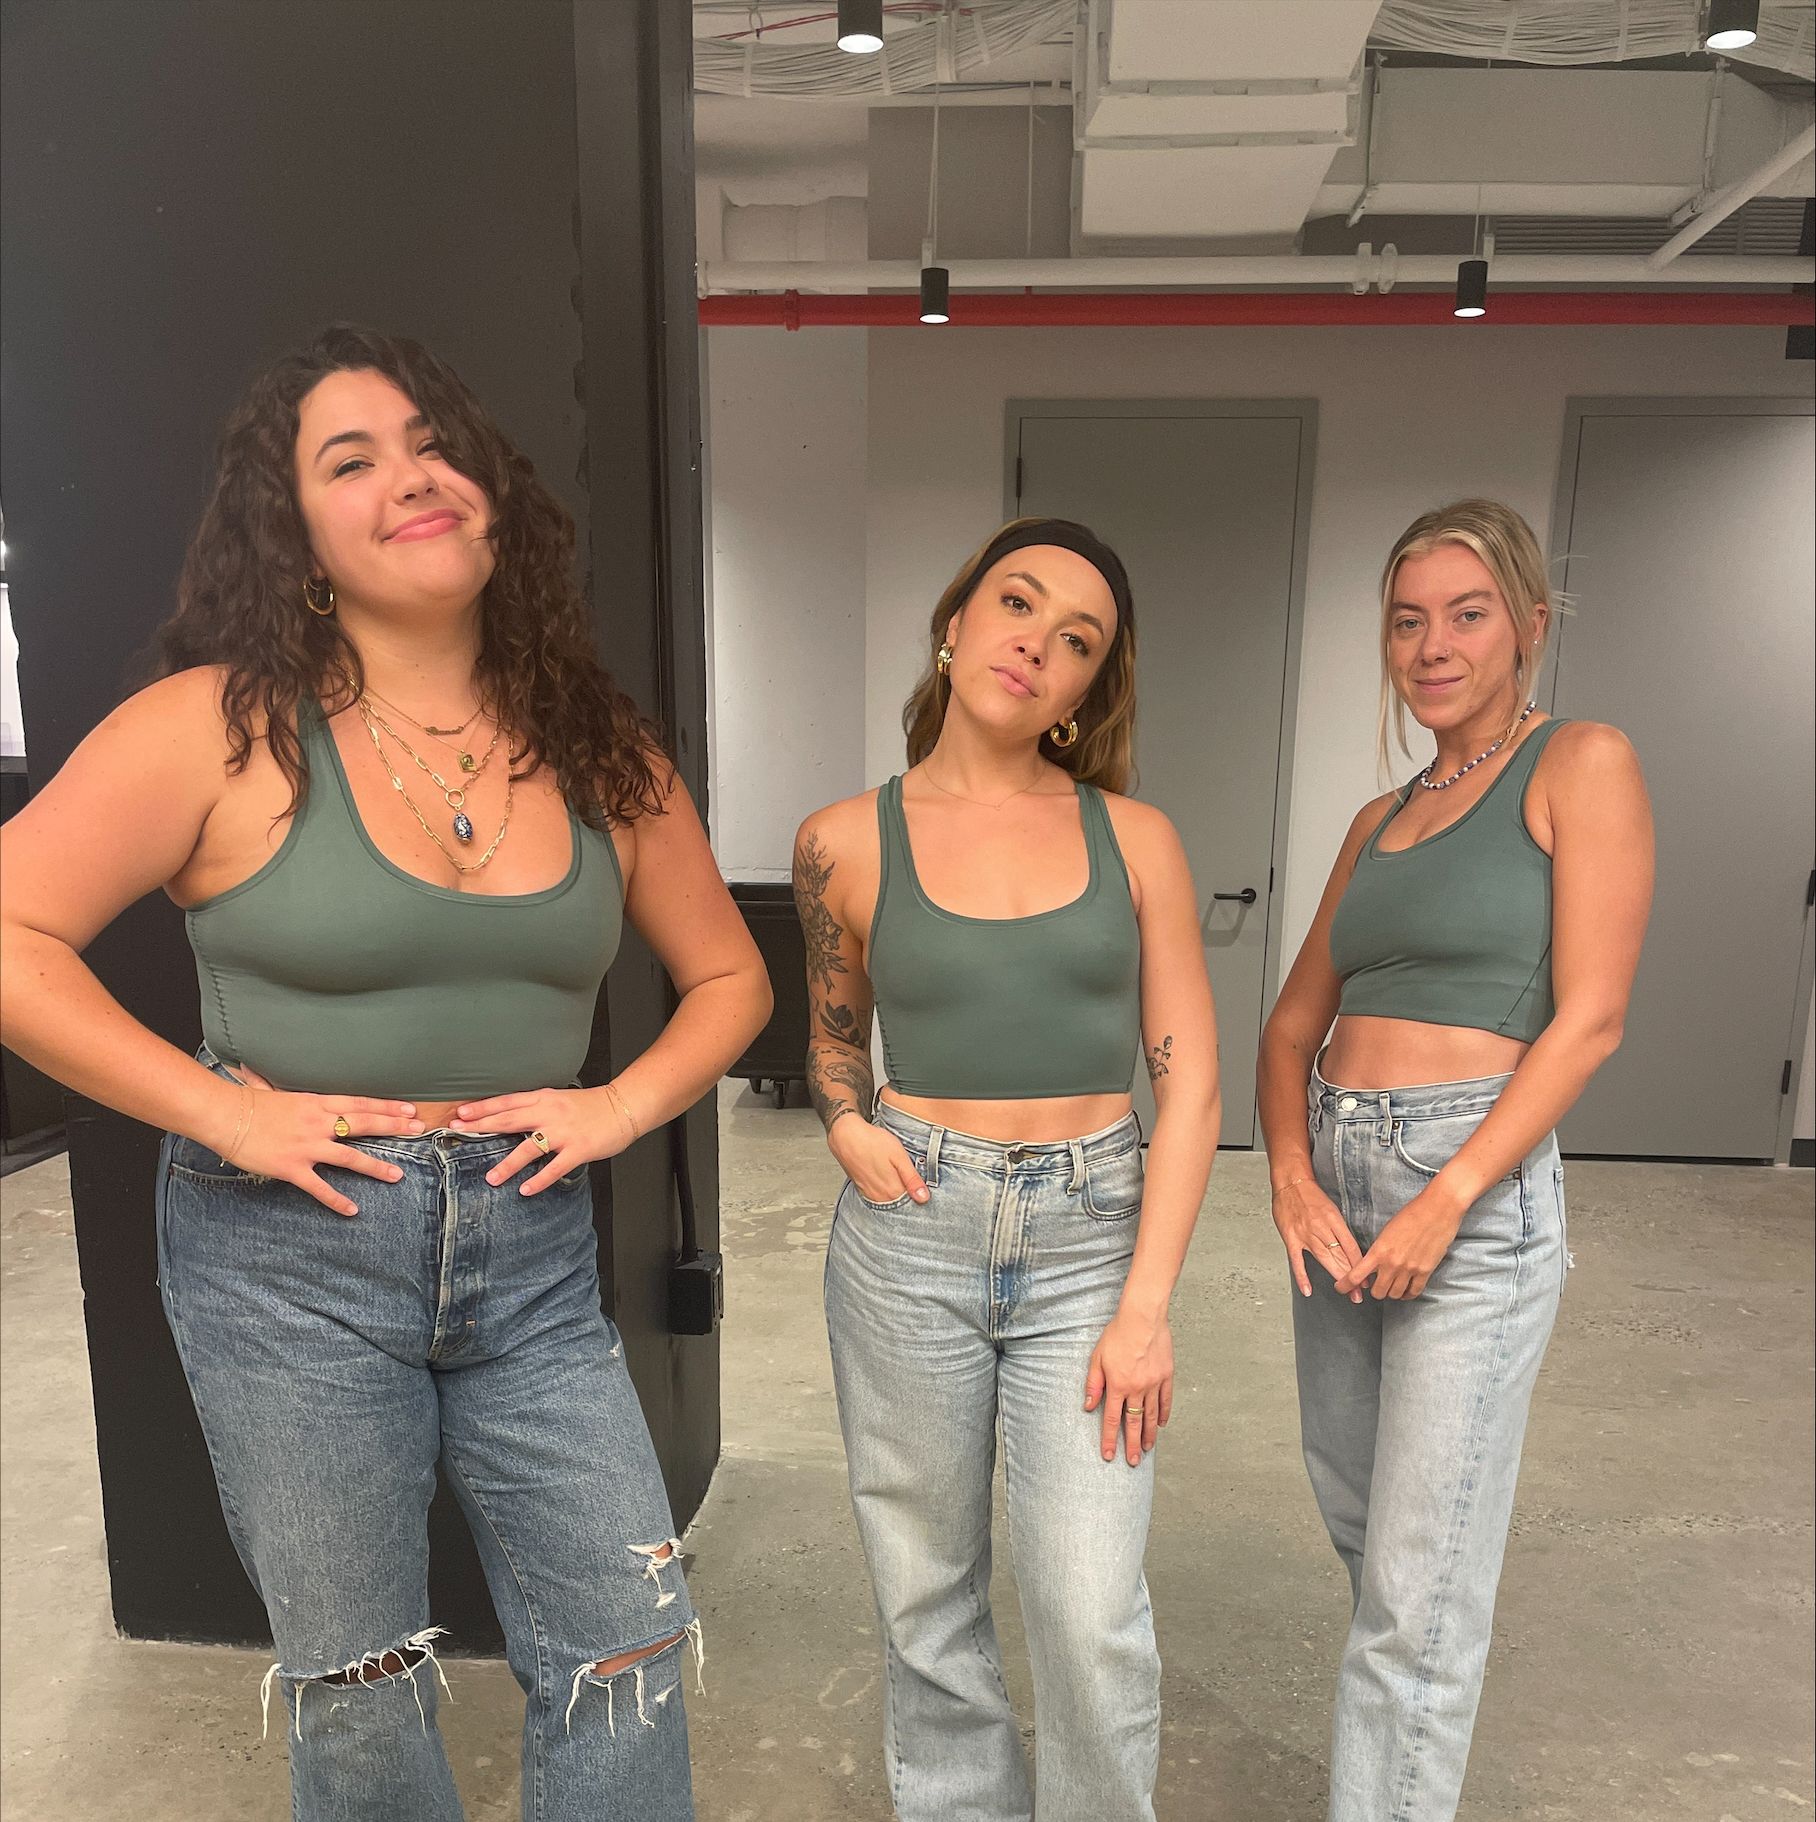 We Tried Lululemon's New Wundermost Bodywear and We Have Notes